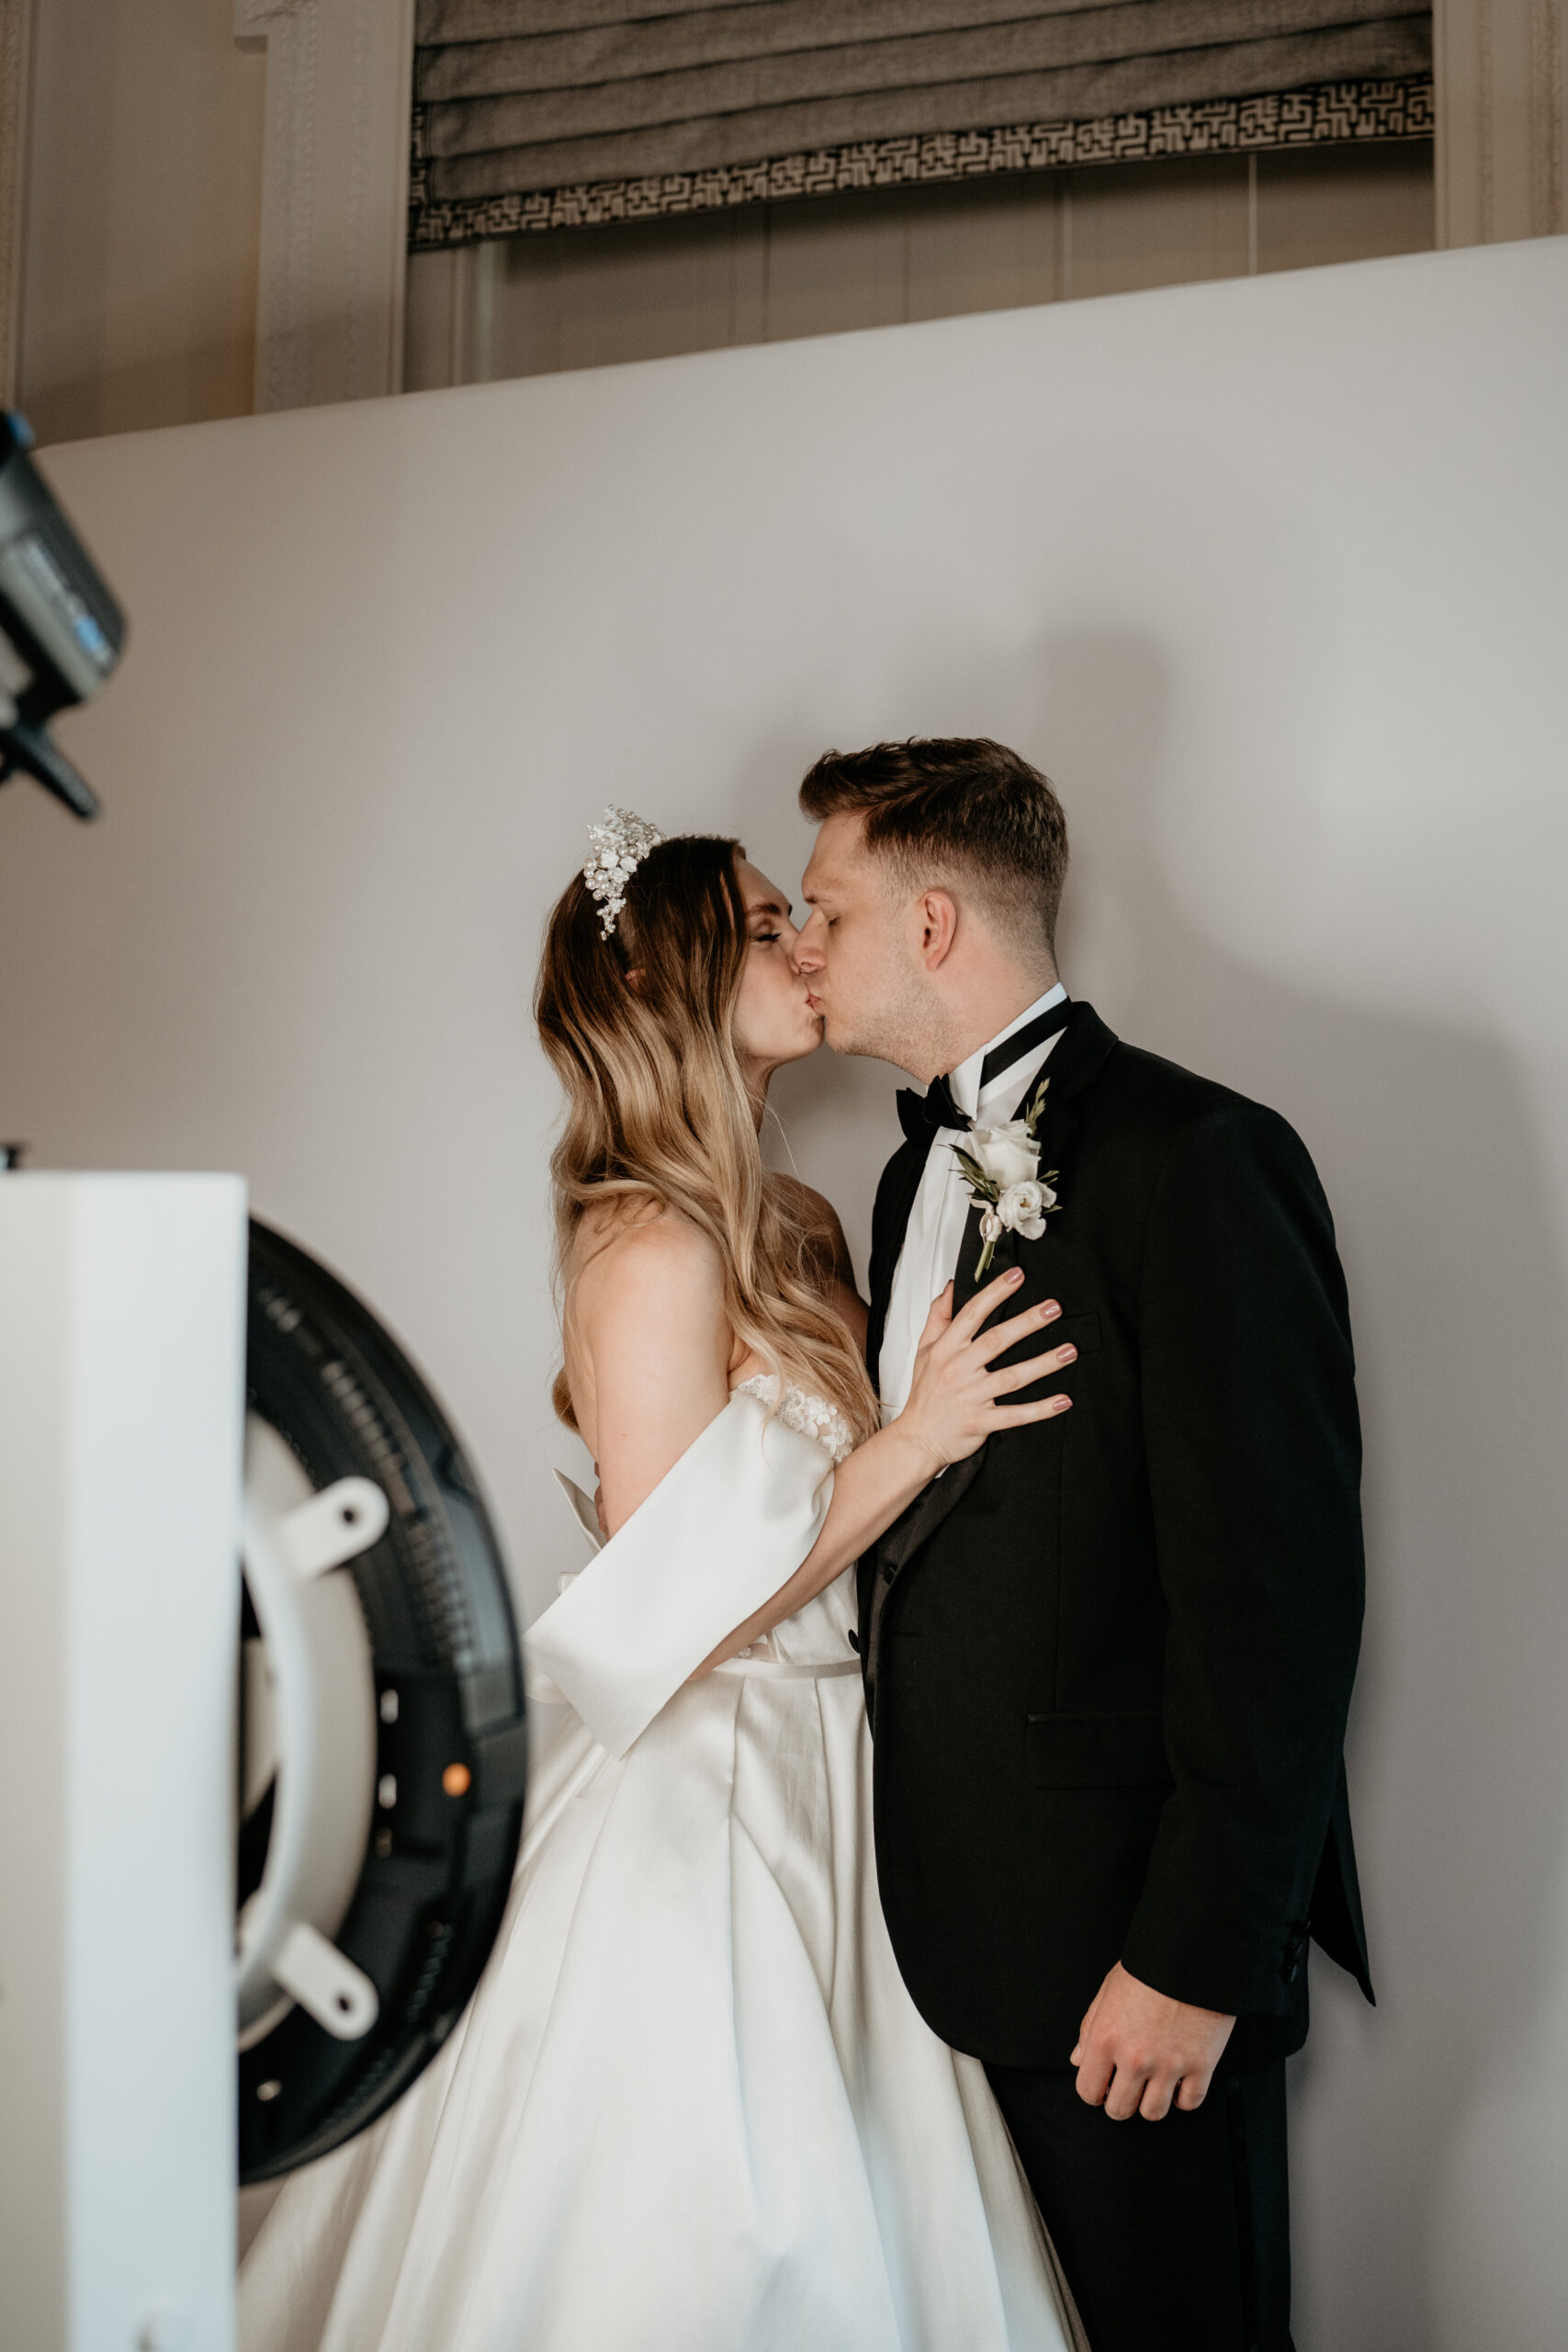 Black and White Photo Booth Hire for a Luxury Wedding in England